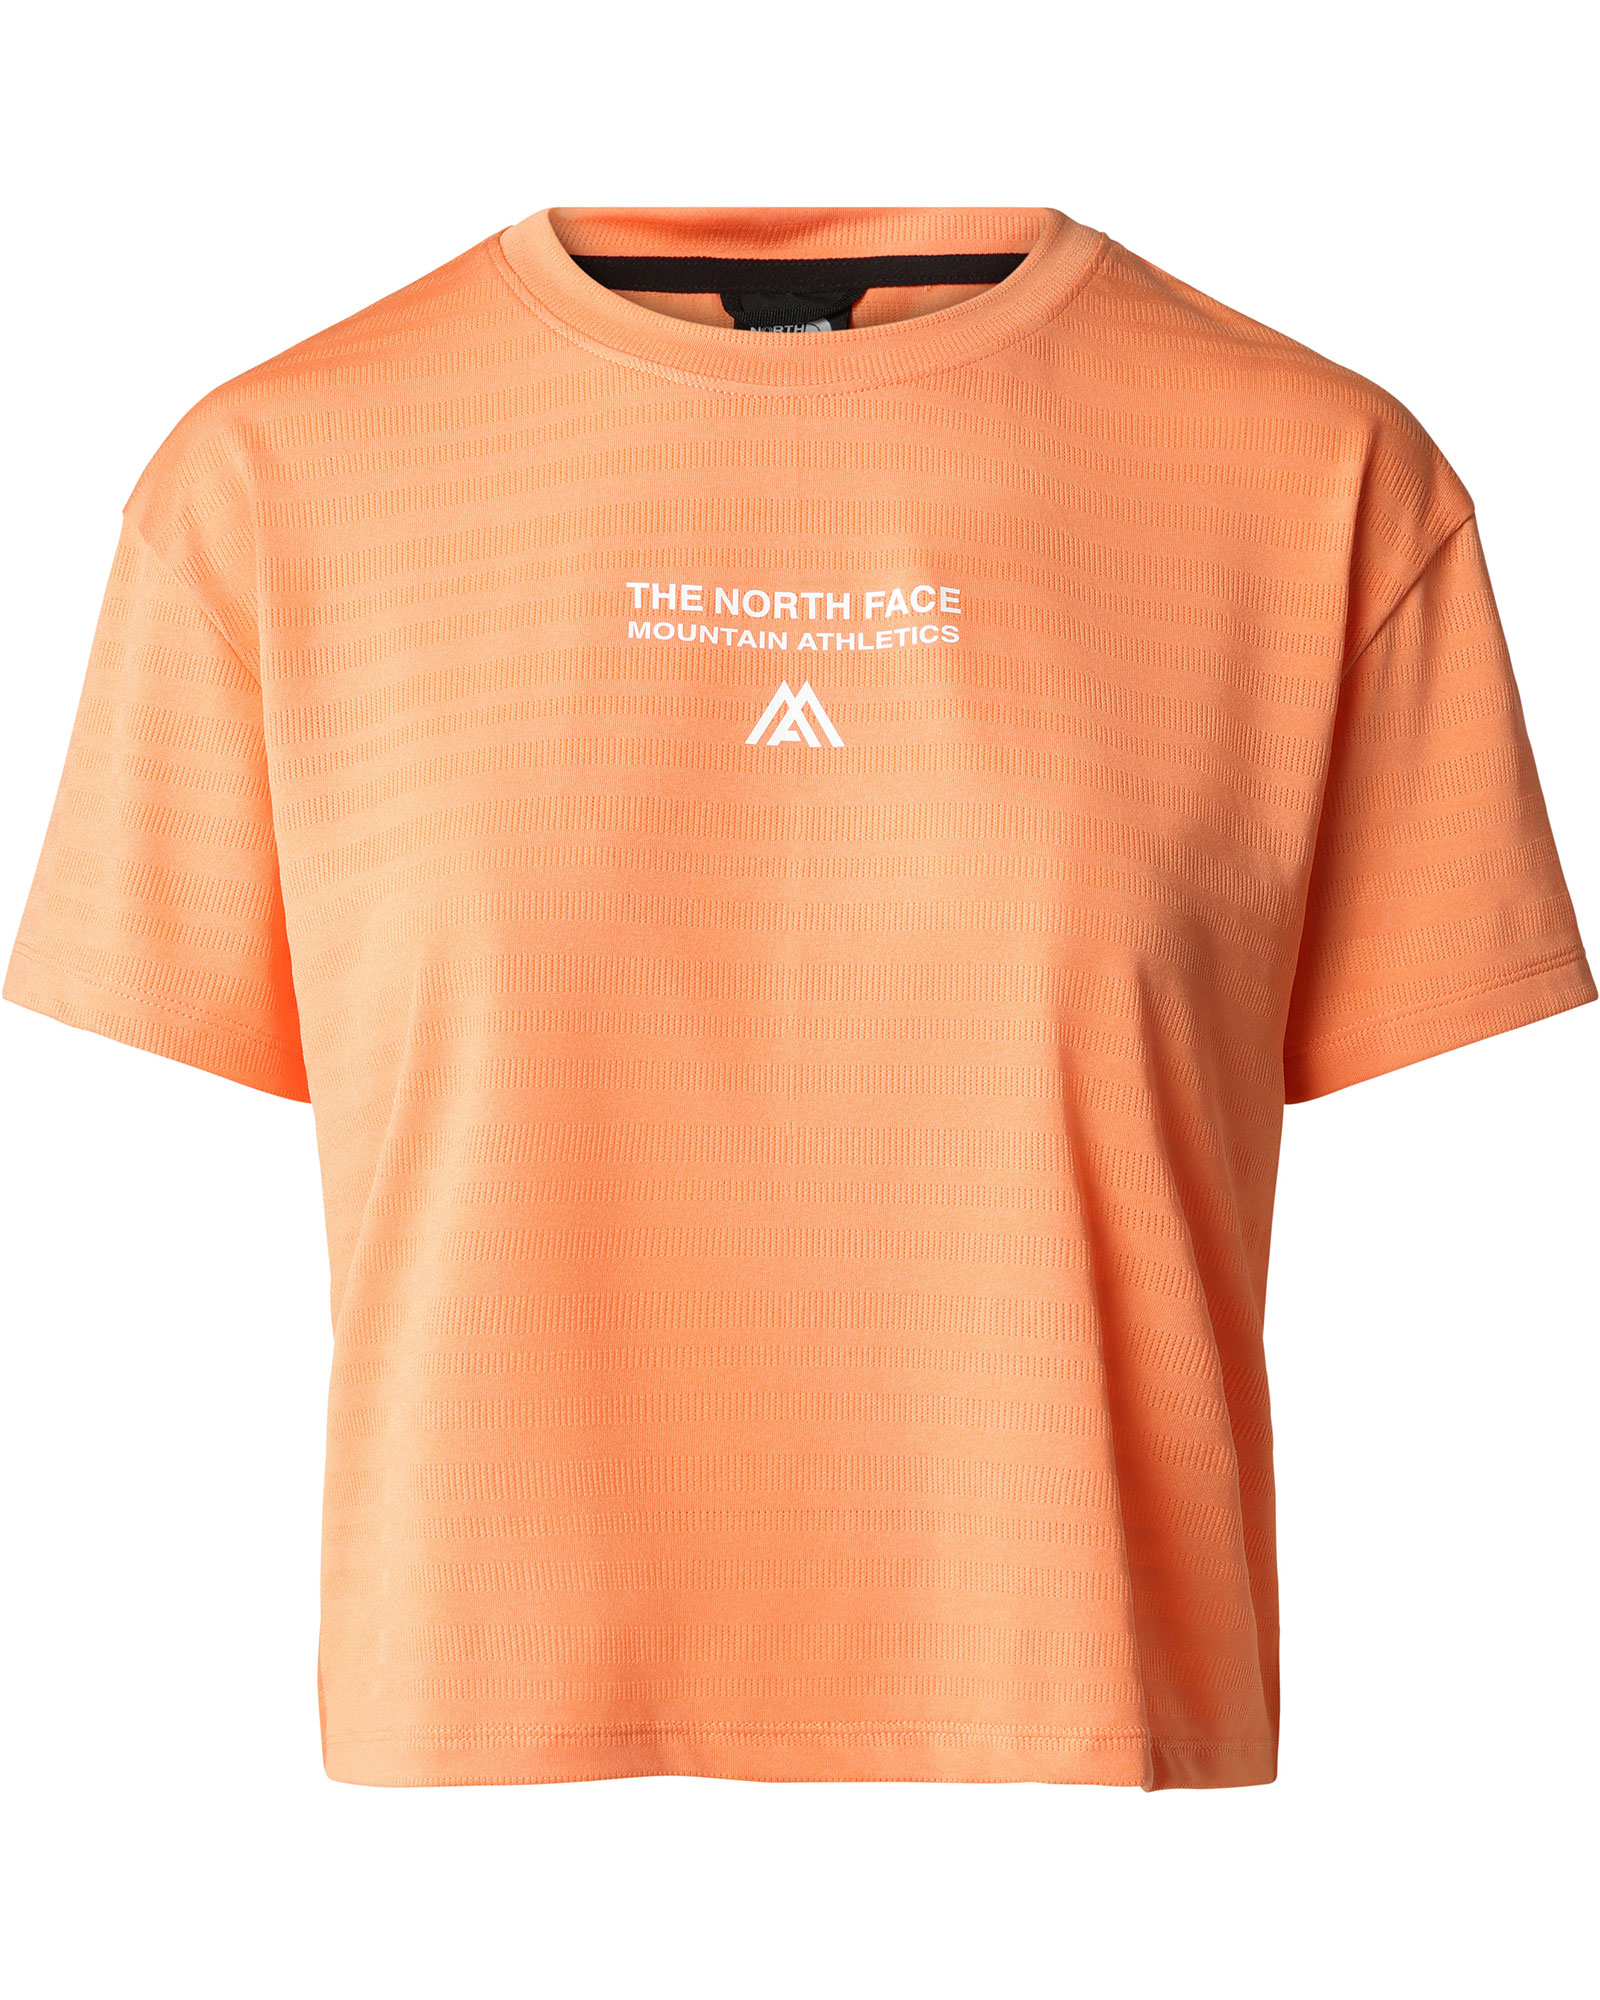 The North Face Women’s MA T Shirt - Dusty Coral Orange M